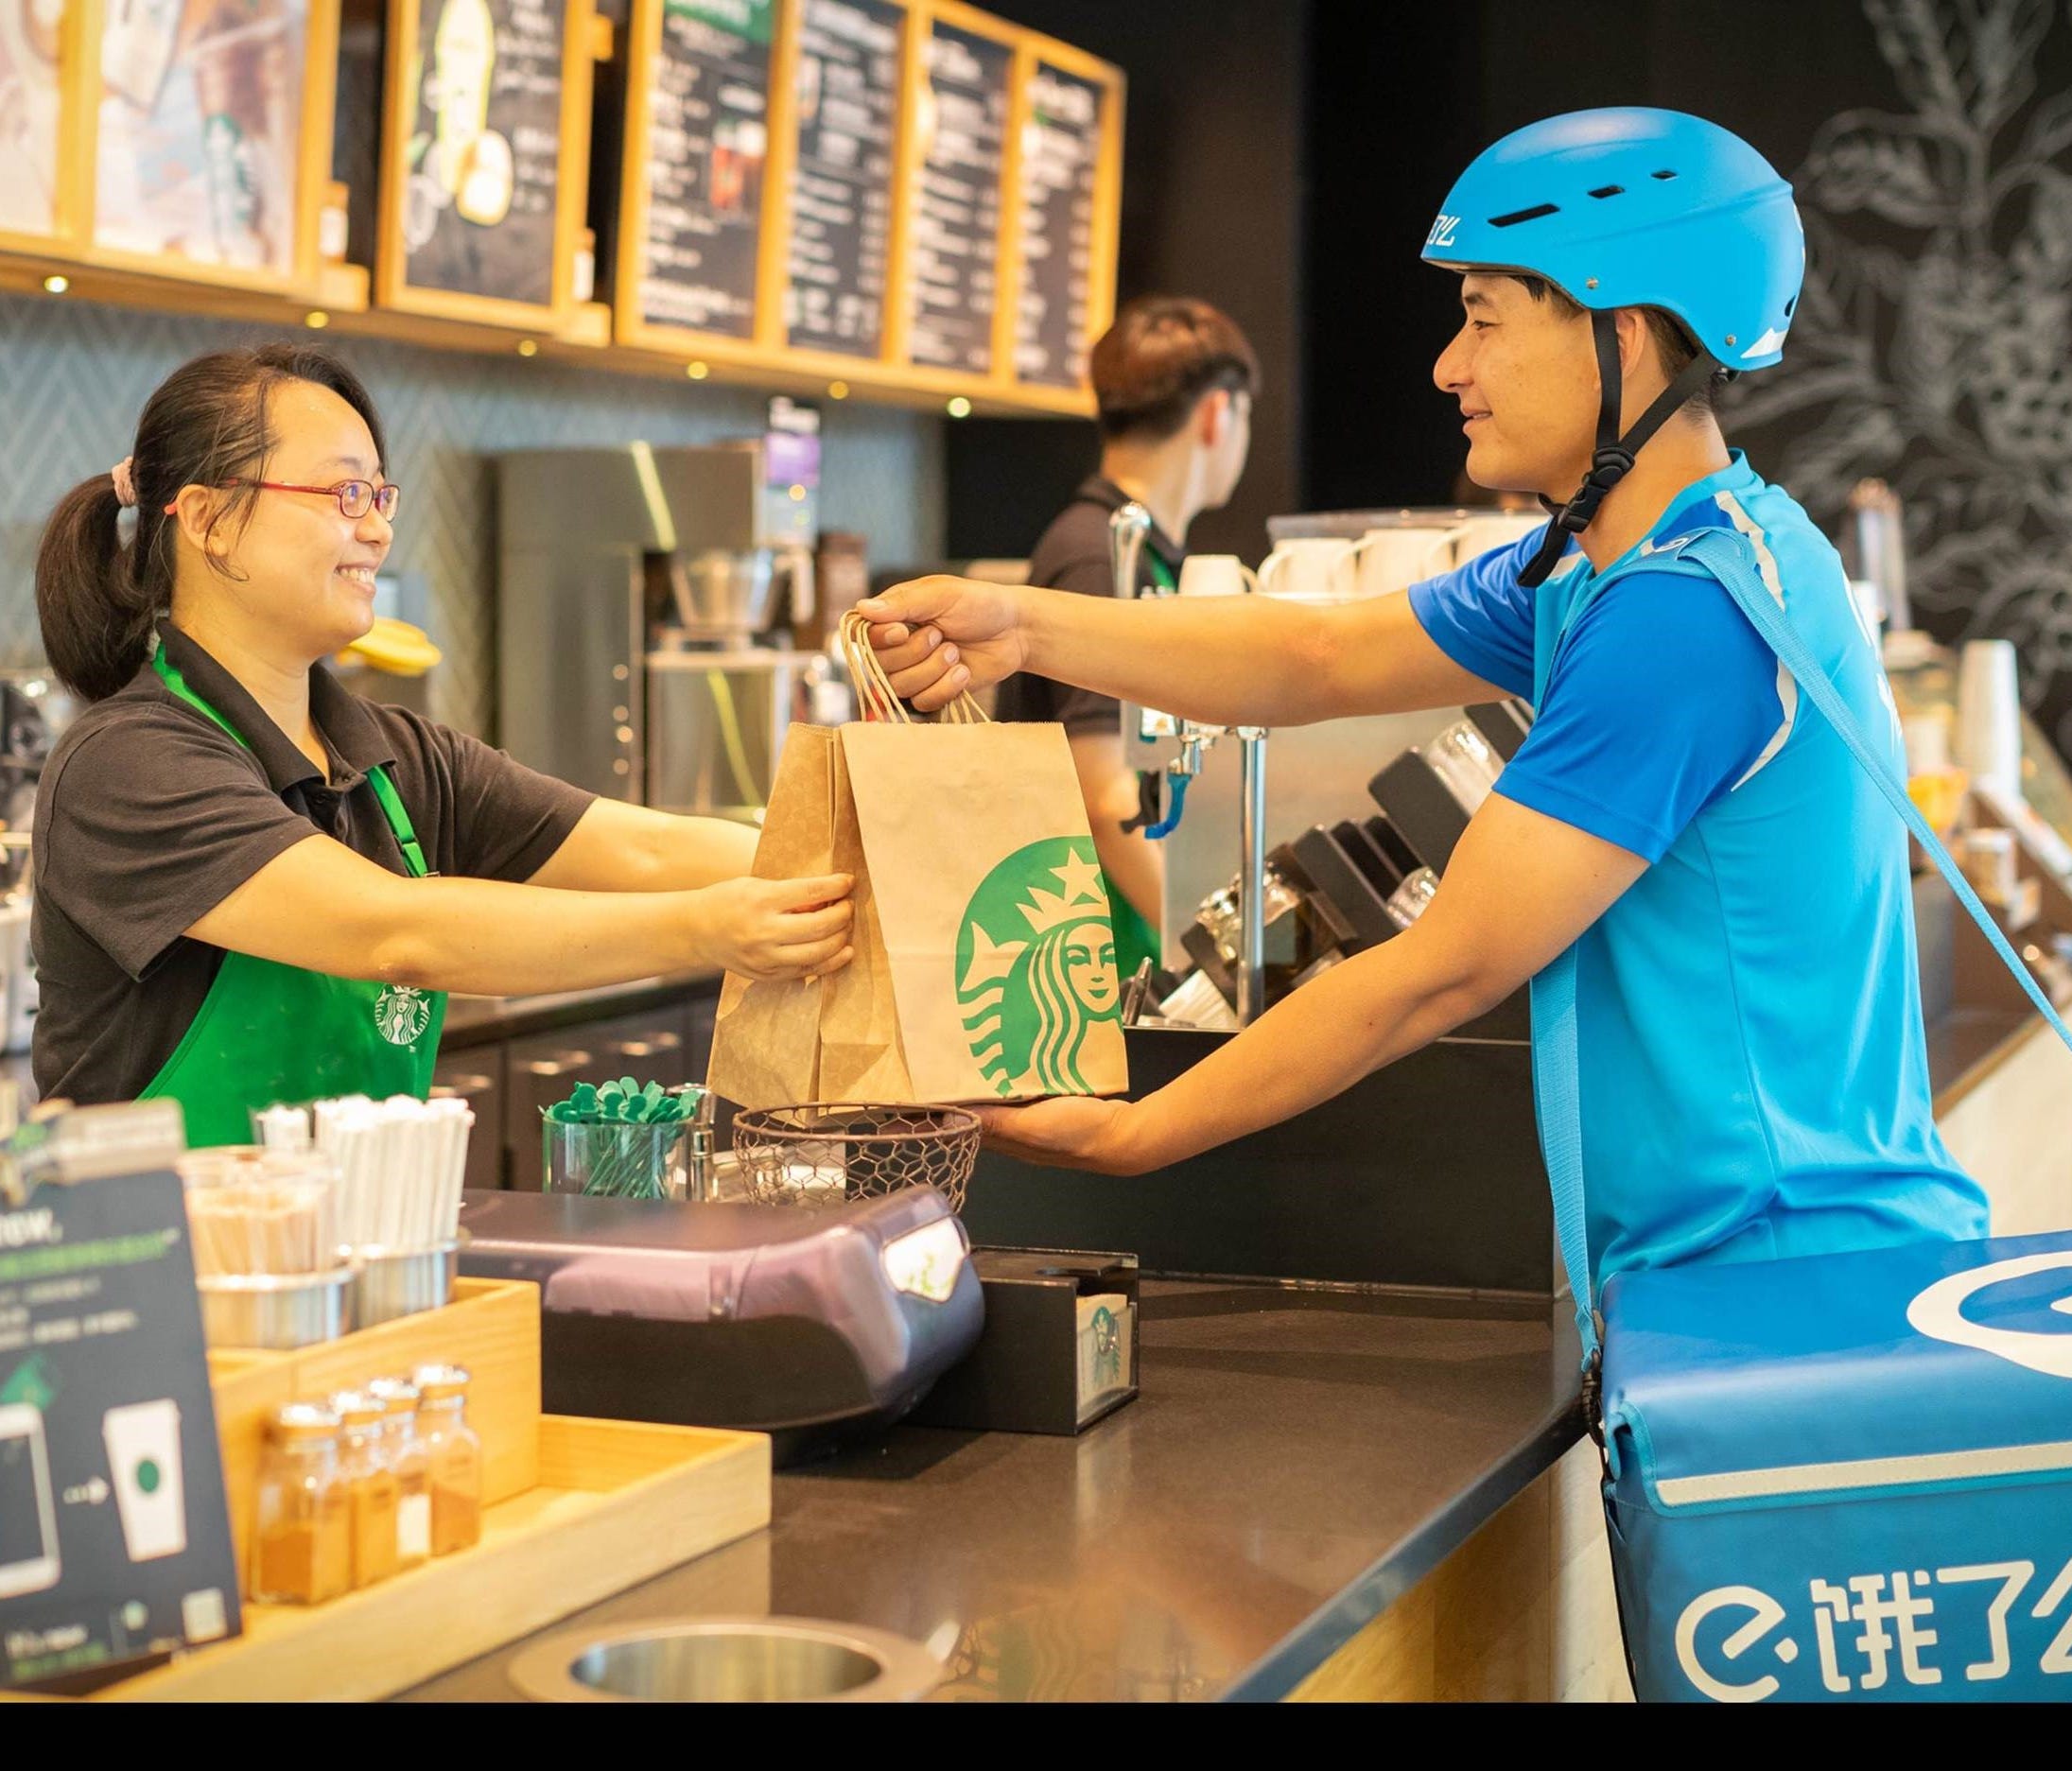 Starbucks and Alibaba have partnered together to boost consumer coffee experience in China.